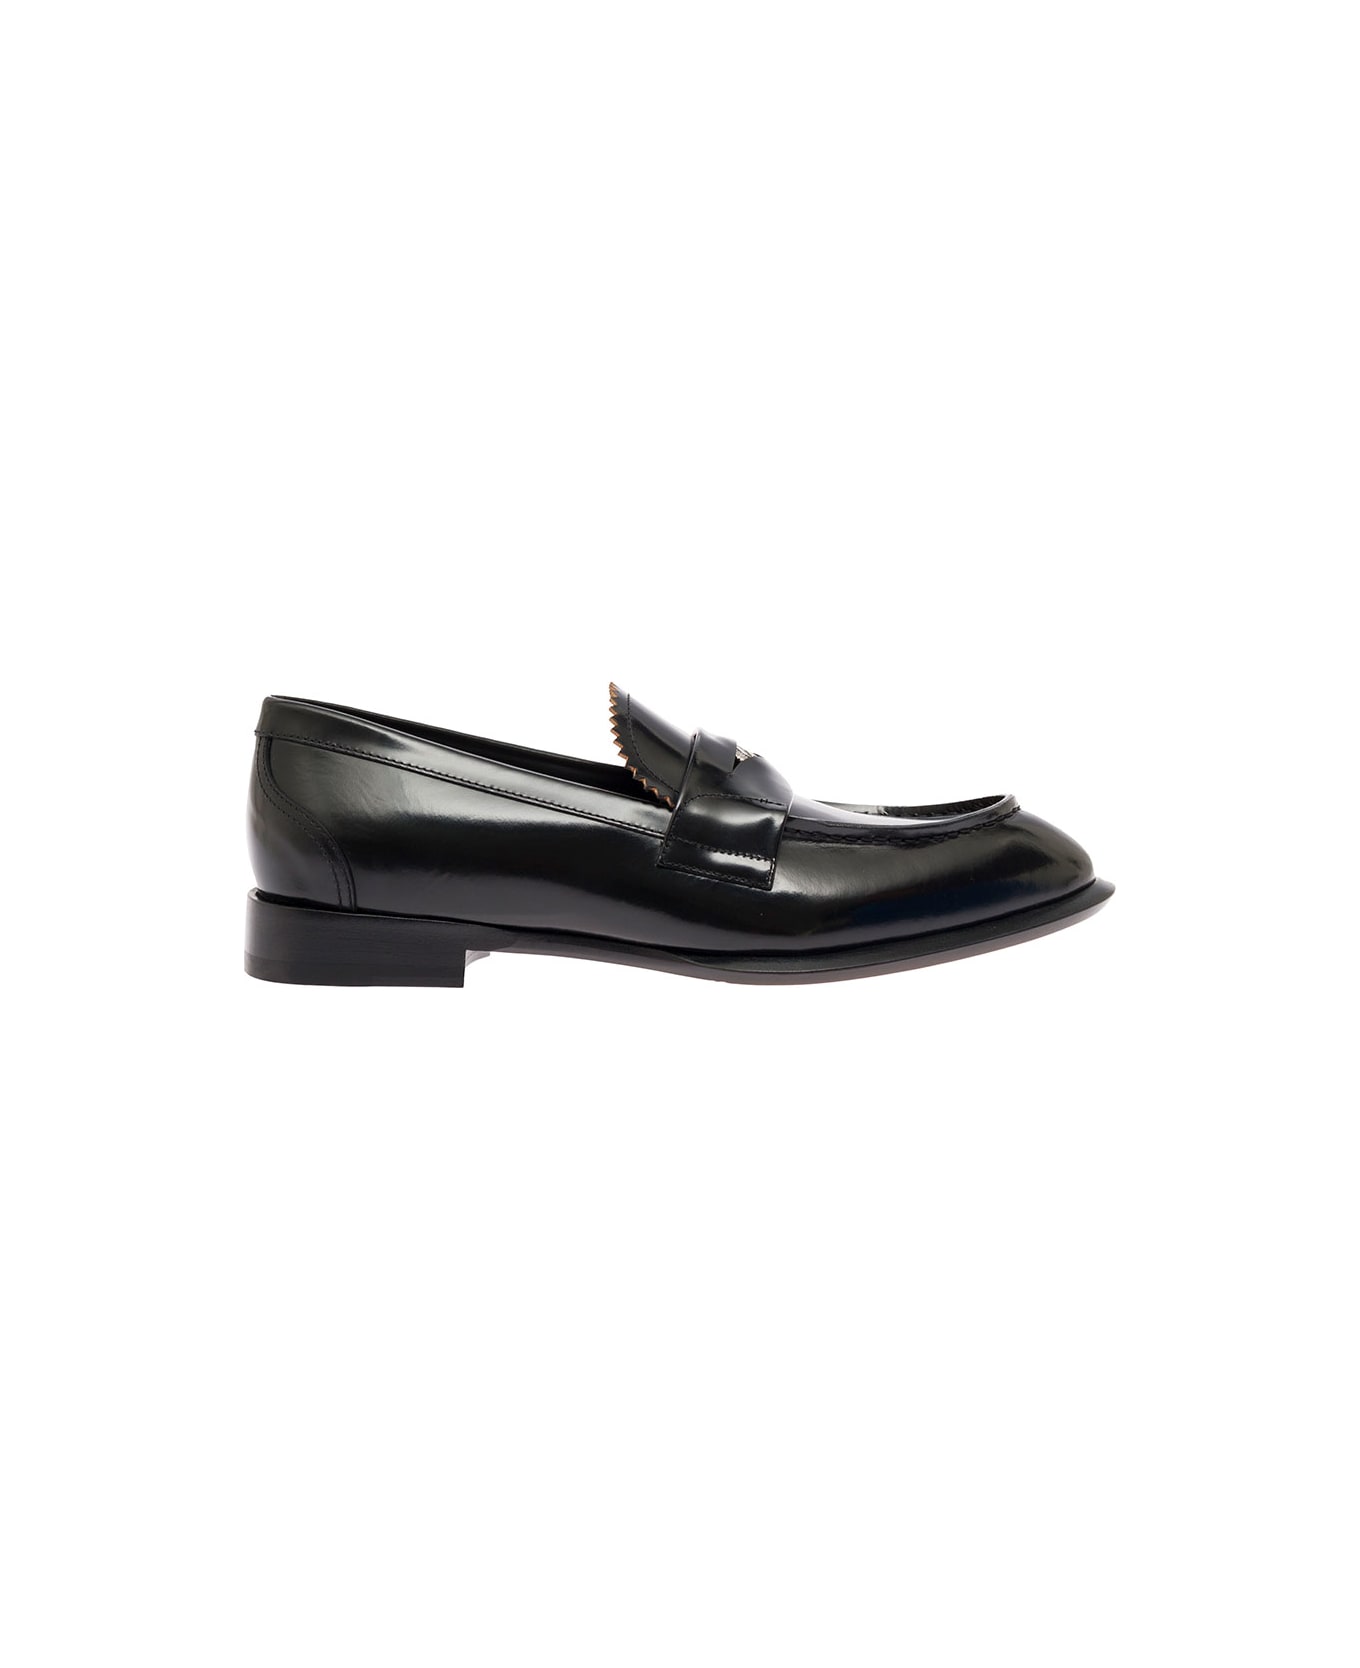 Alexander McQueen Man's Black Leather Loafers With Logo - Black ローファー＆デッキシューズ